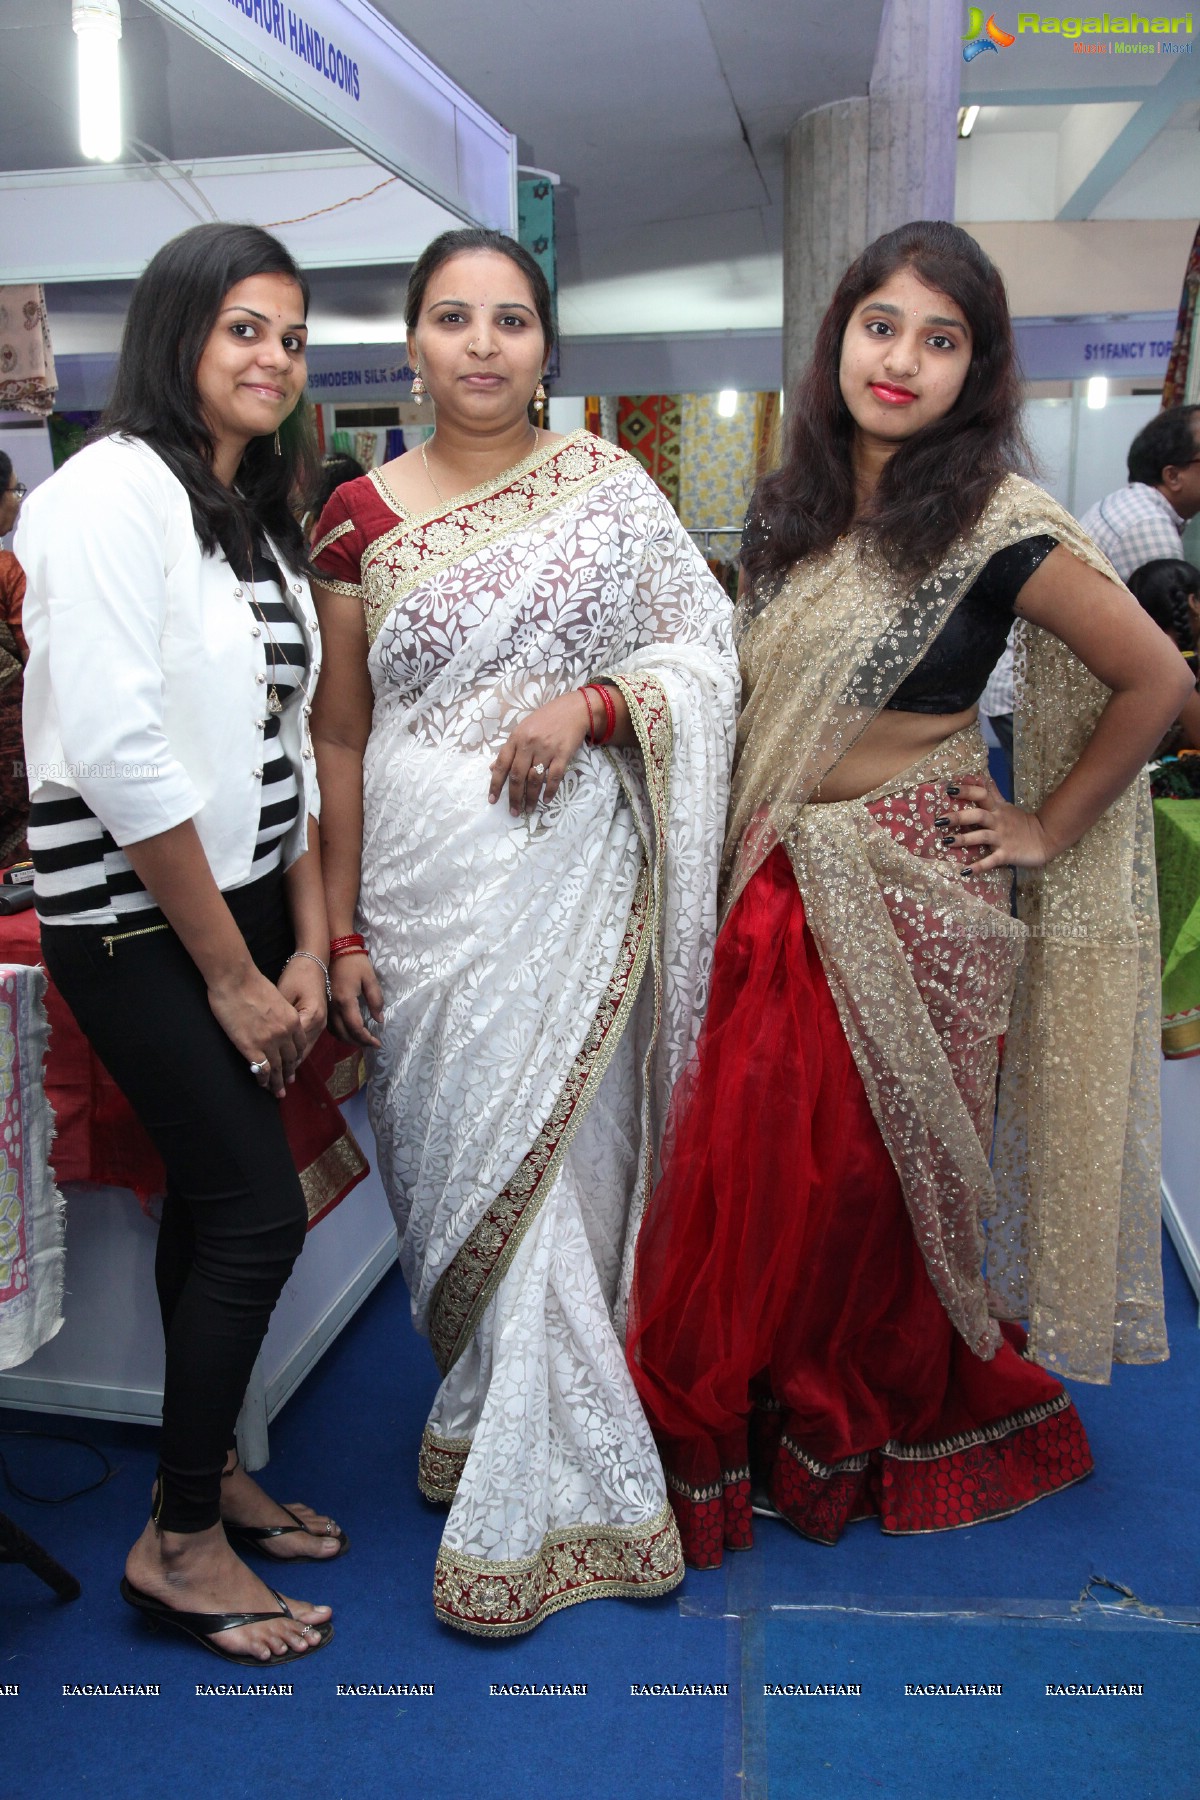 IN STYL Exhibition - Inaugurated by Sharon Fernandes, Bina Singh